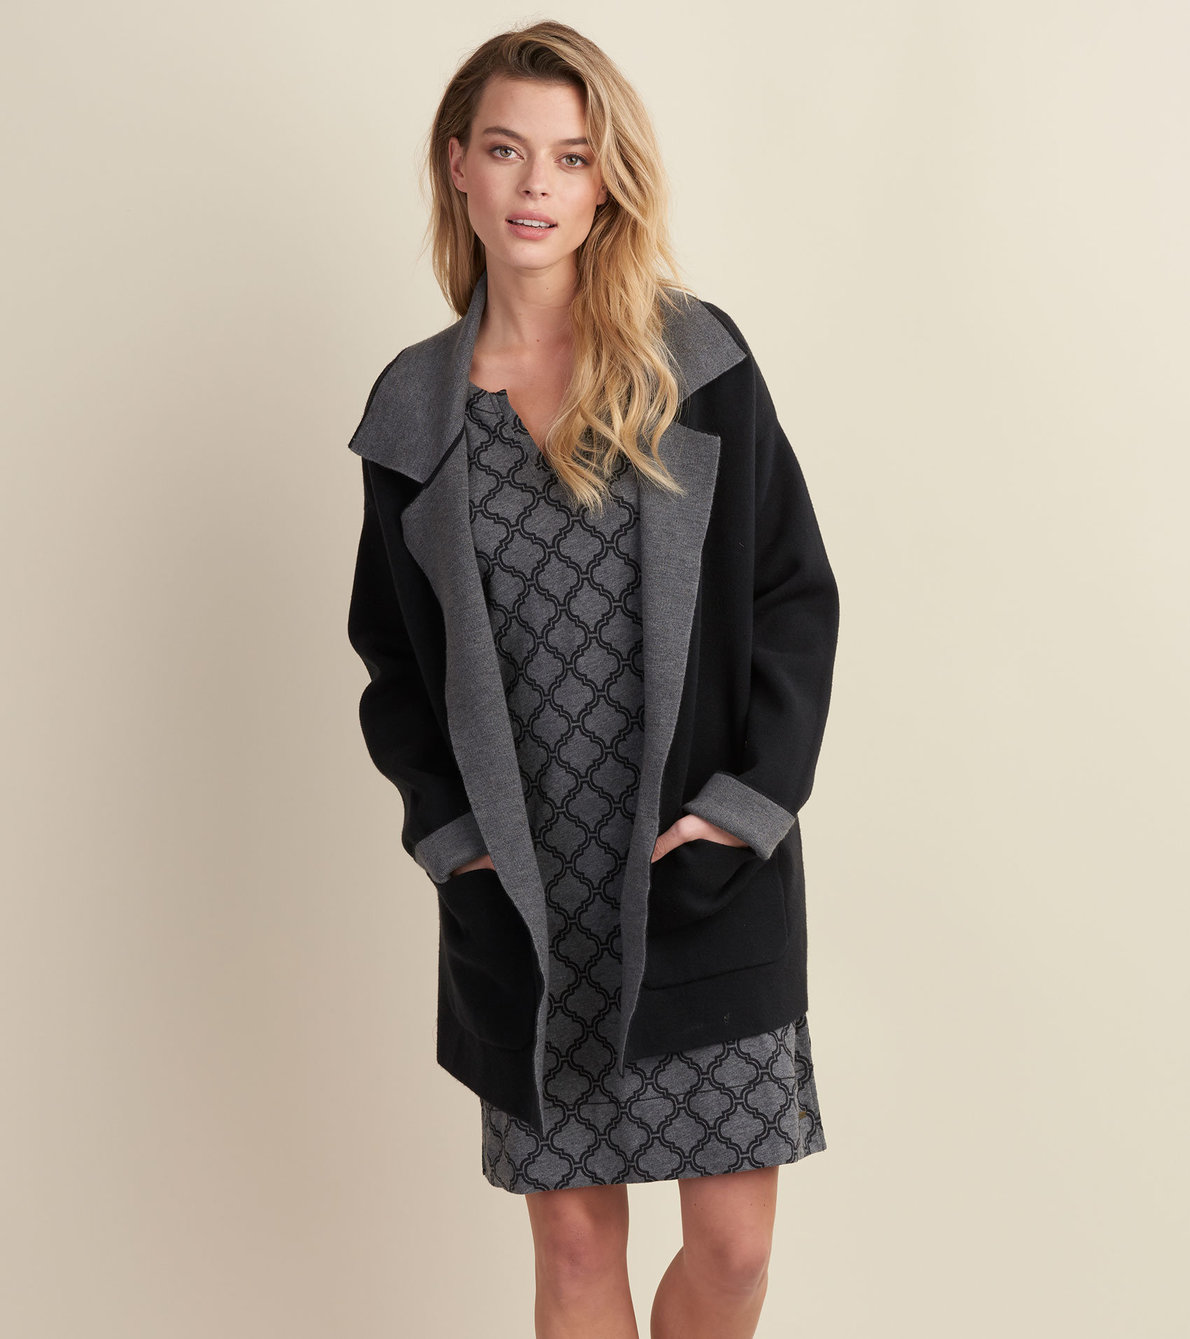 View larger image of Black and Charcoal Lauren Overcoat